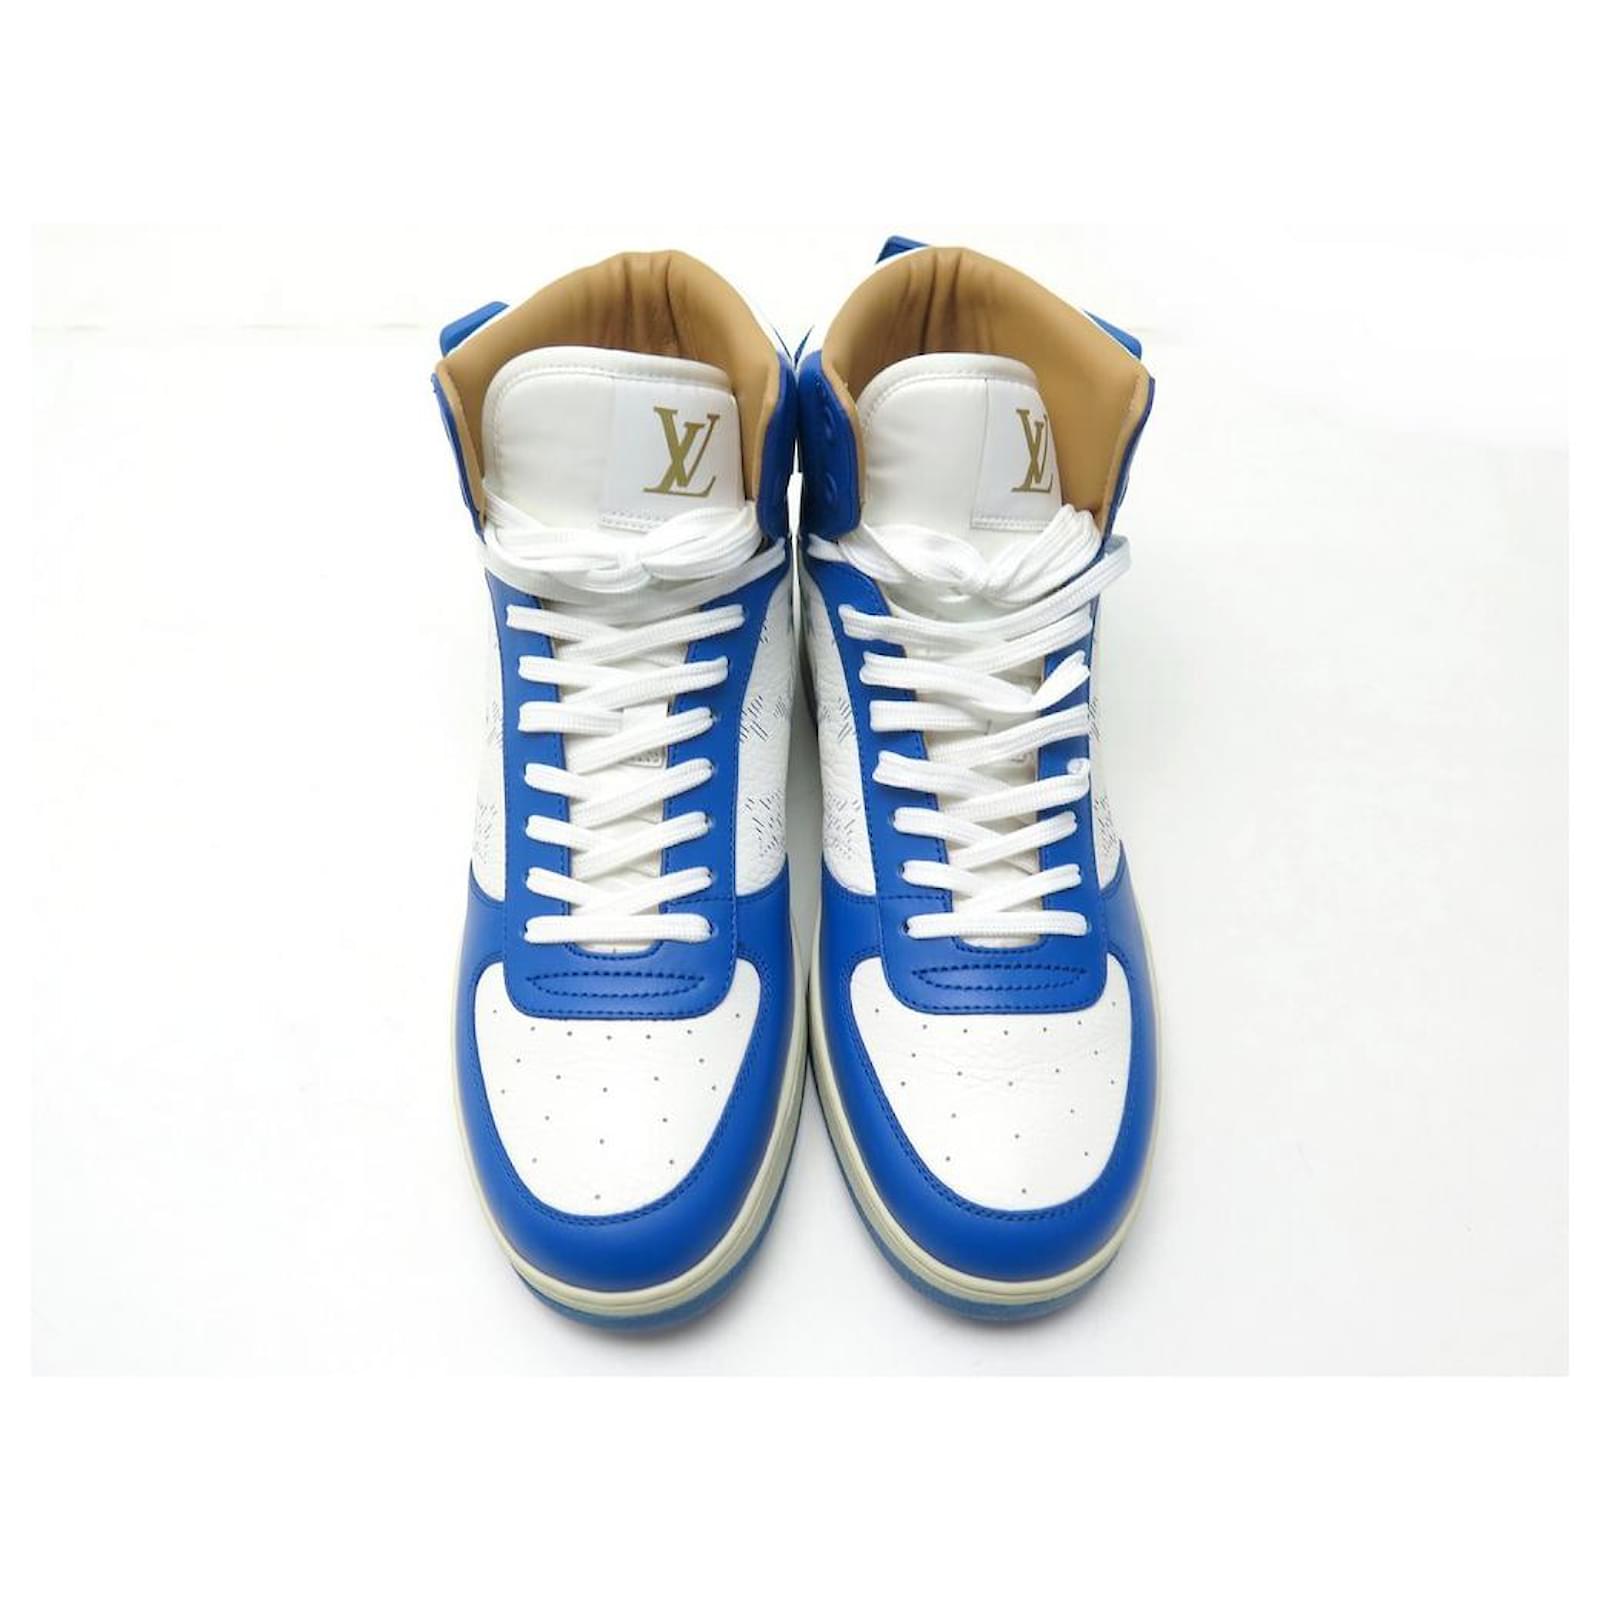 NEW LOUIS VUITTON RIVOLI SHOES 1to5EQU 5 39 BLUE LEATHER SNEAKERS